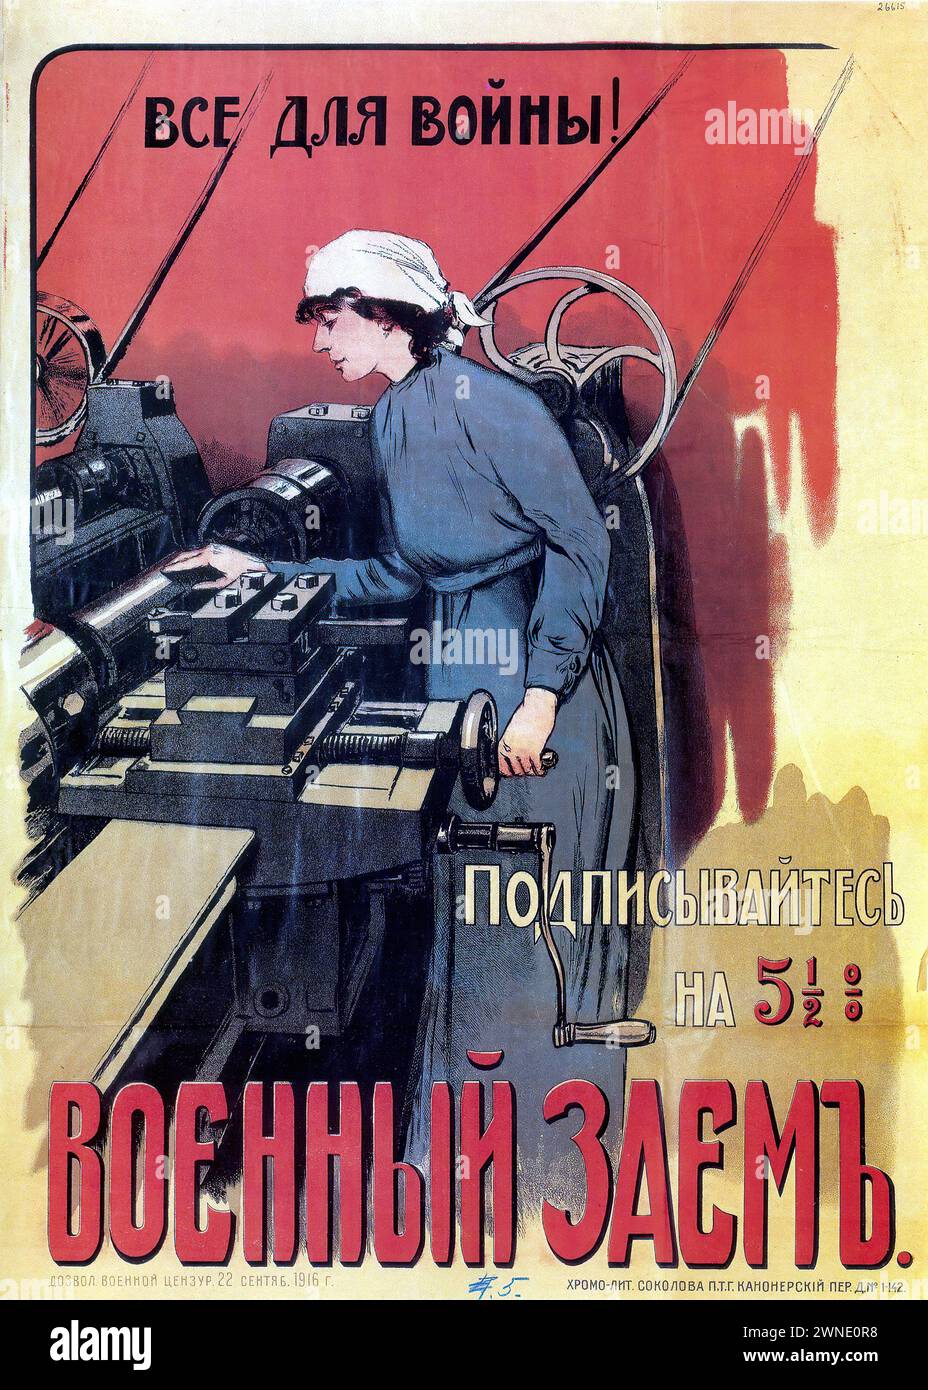 Buy War Bonds. 1916.jpg | 'ВСЕ ДЛЯ ВОЙНЫ! Подписывайтесь на ВОЕННЫЙ ЗАЕМ.' ['EVERYTHING FOR THE WAR! Subscribe to the WAR LOAN.'] Vintage Advertising. The poster features a female factory worker operating machinery, set against a red backdrop, urging viewers to subscribe to war loans. The style is propagandistic and characteristic of early 20th-century Russian posters. Stock Photo